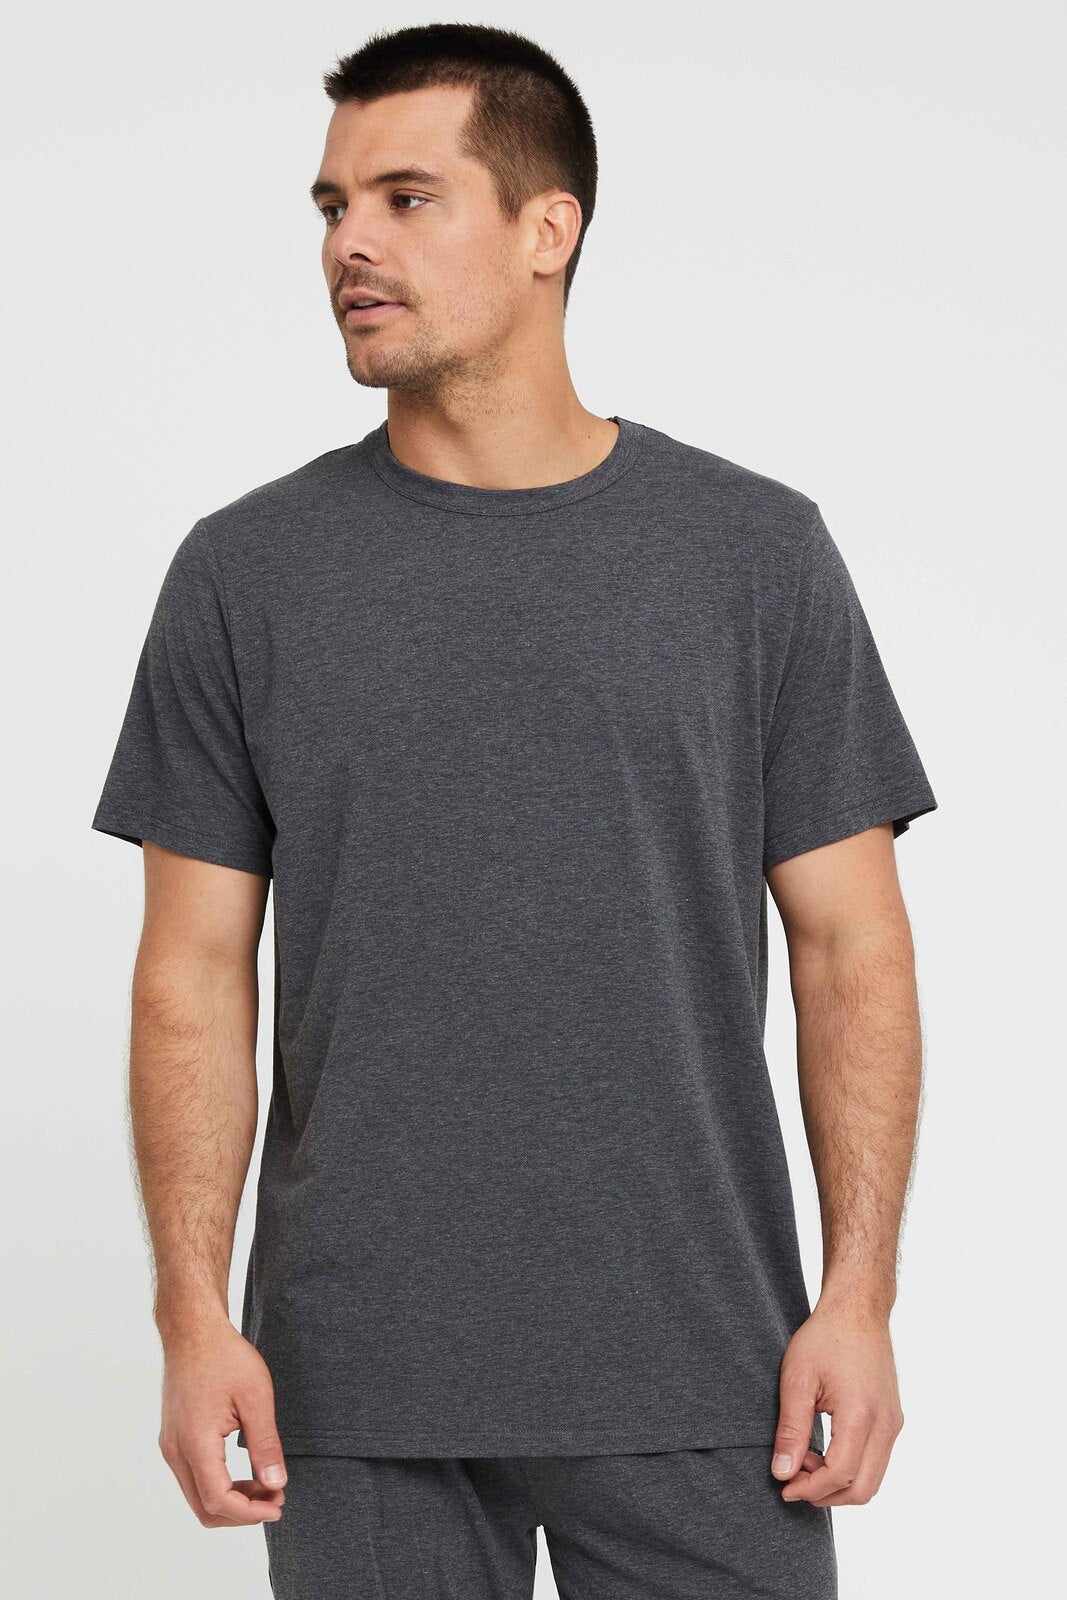 Men's Favourite Tee - Charcoal | Bamboo Body